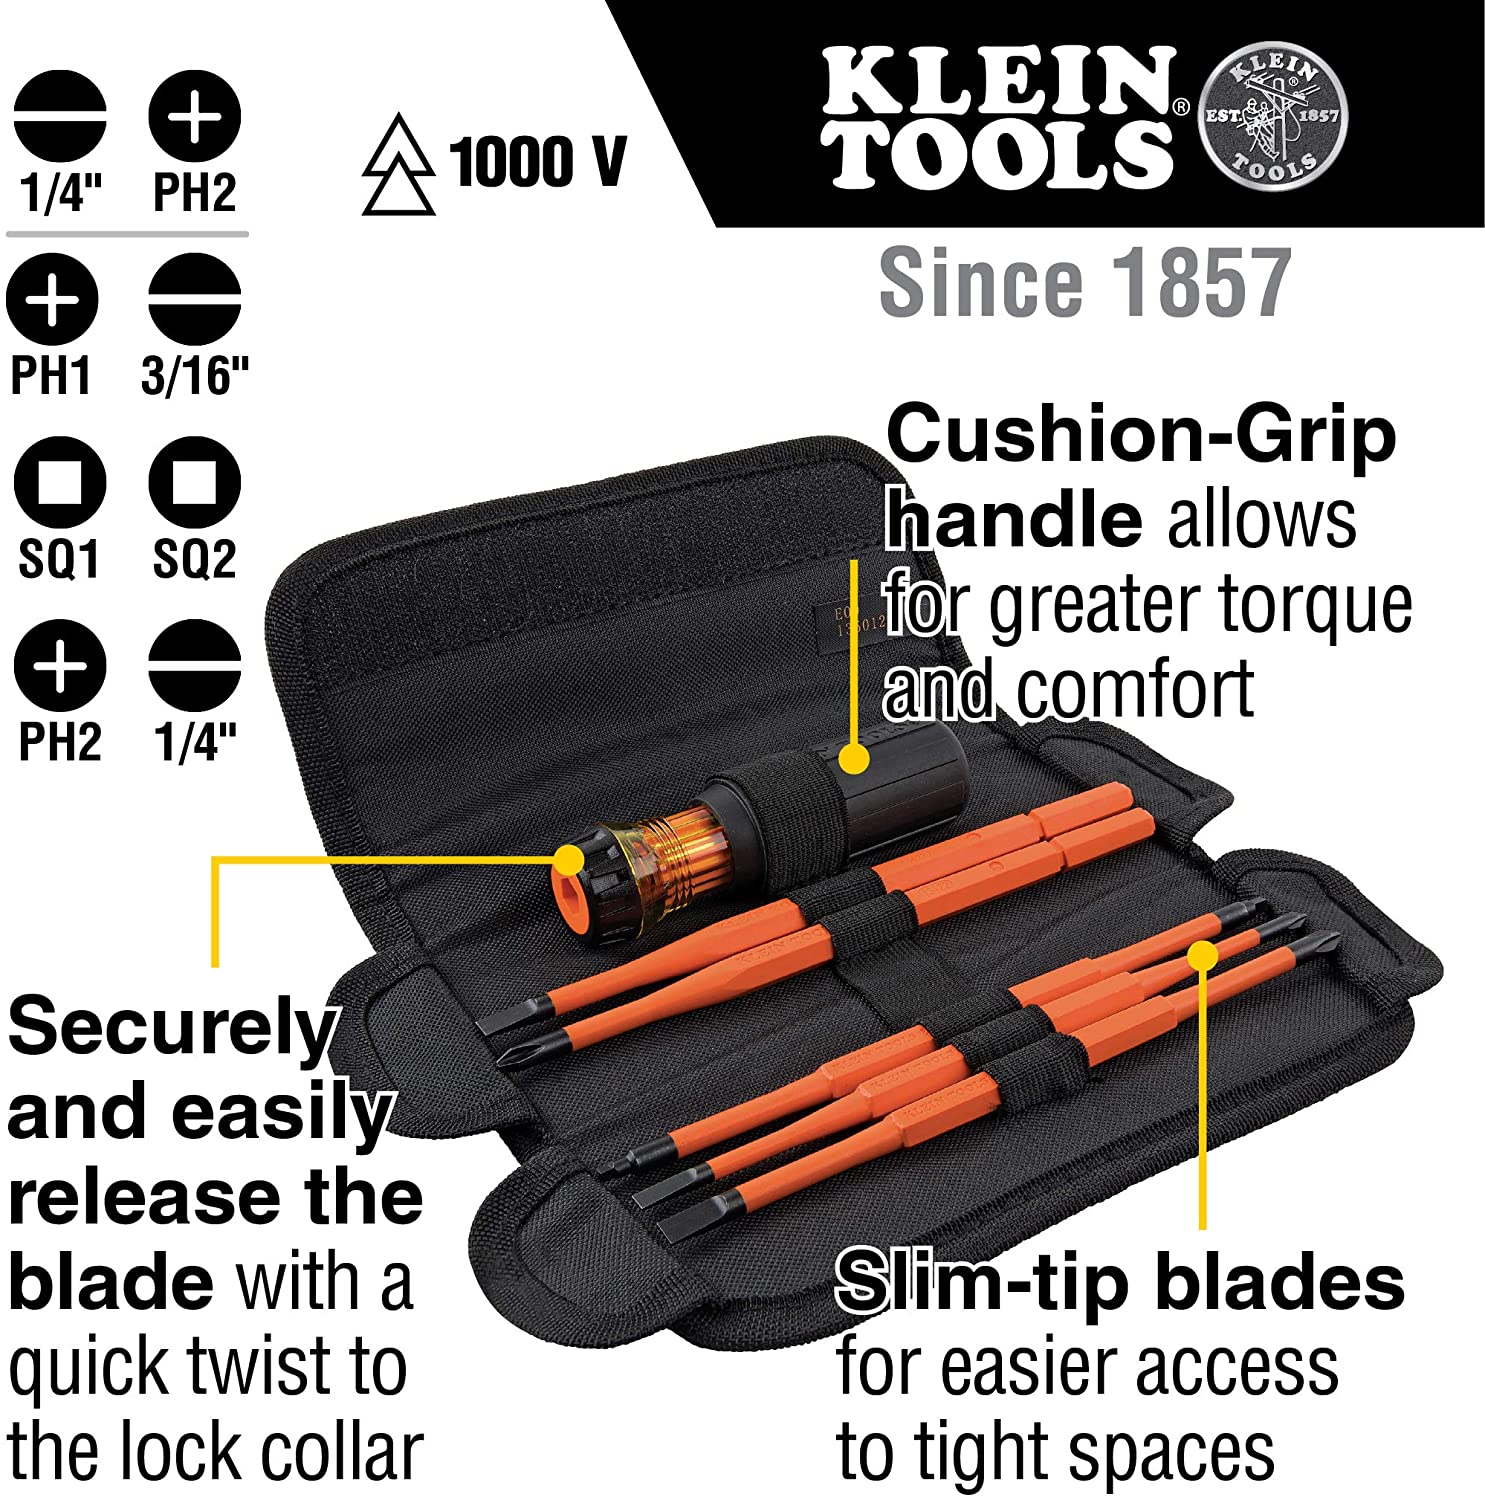 Klein Tools 32288 Insulated Screwdriver, 8-in-1 Screwdriver Set with Interchangeable Blades, 3 Phillips, 3 Slotted & 2 Square Tips